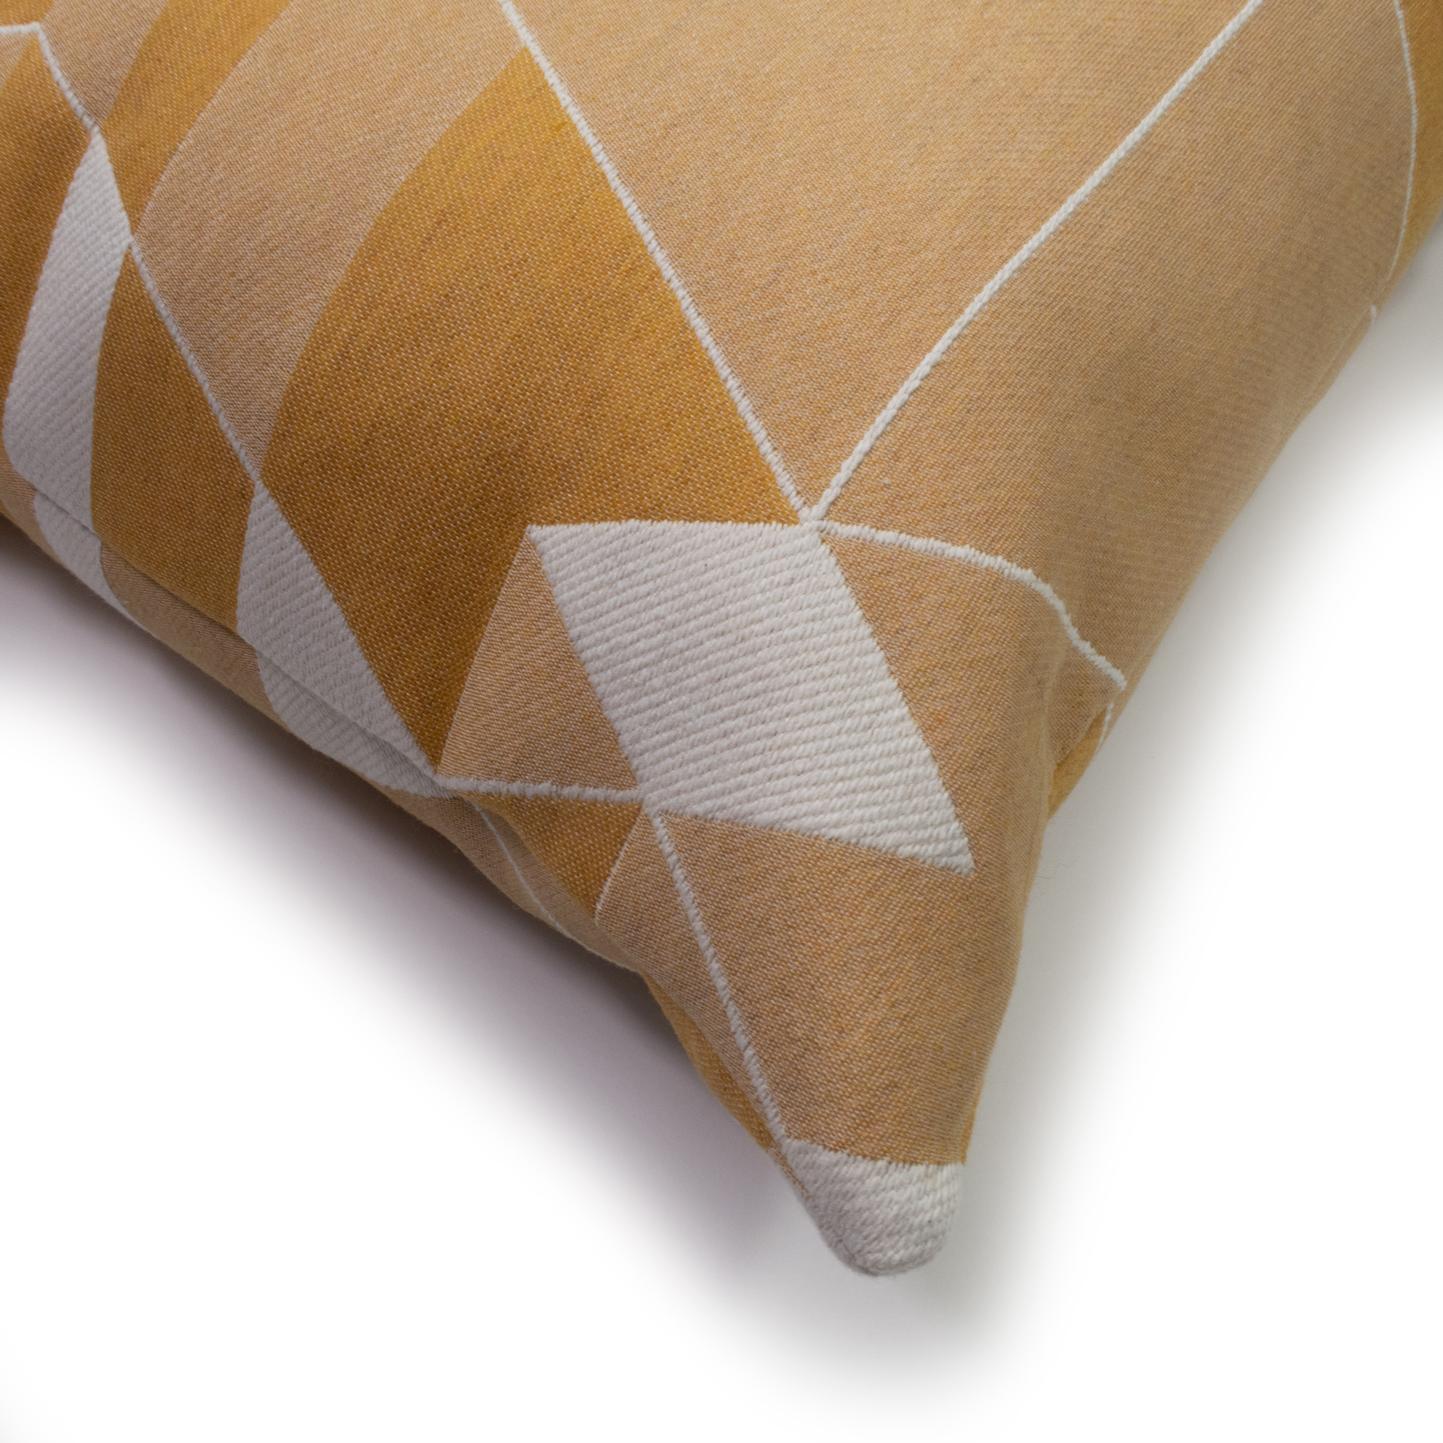 Our Coup de Foudre or ‘Love at first sight’ fabric is art in action. With a nod to Picasso’s Ma Jolie, the various shades of gold interlace to tell a tale of love’s first sweet embrace. 

Made from a combination of high-end Martindale quality yarn